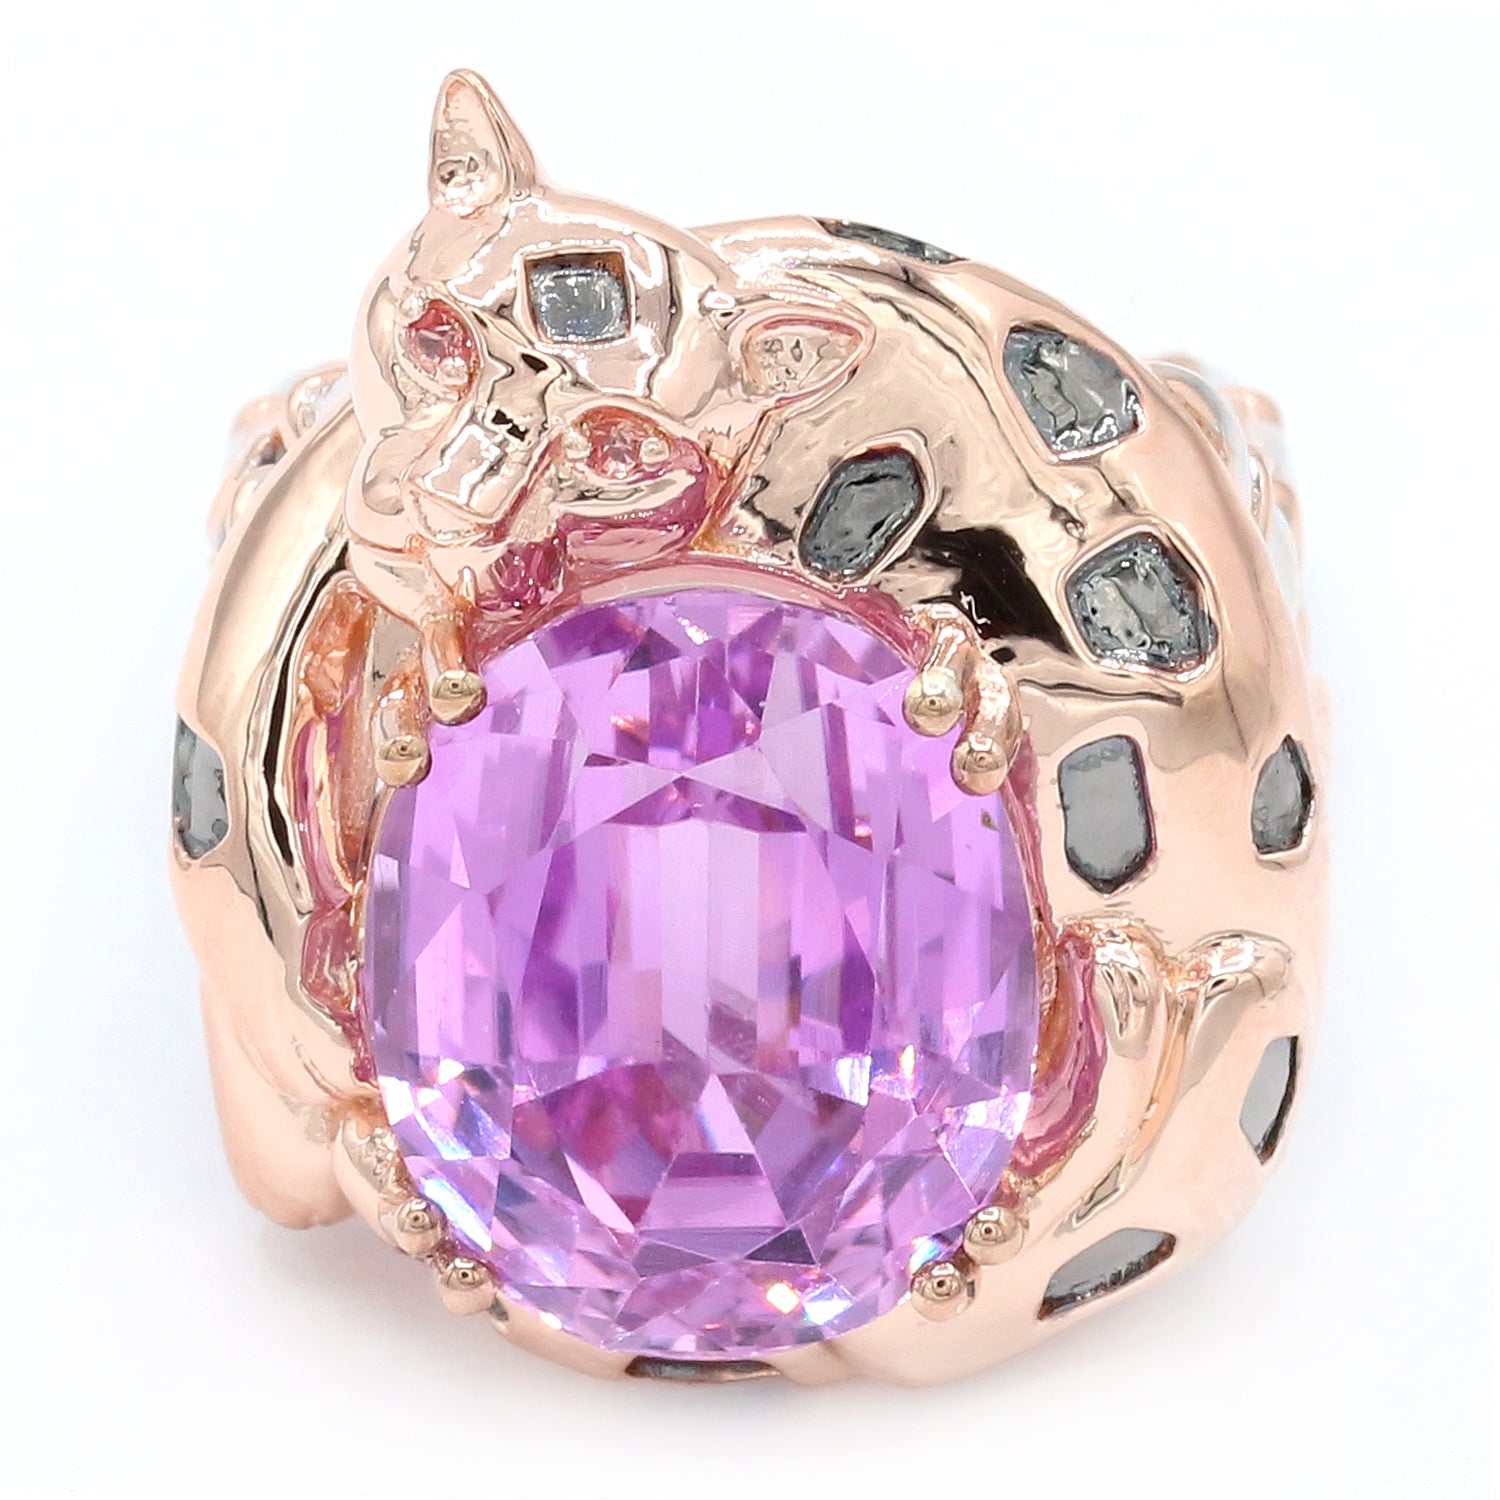 Limited Edition Gems en Vogue Luxe, One-of-a-Kind 18.26ctw Kunzite & Padparadscha Sapphire Panther Ring